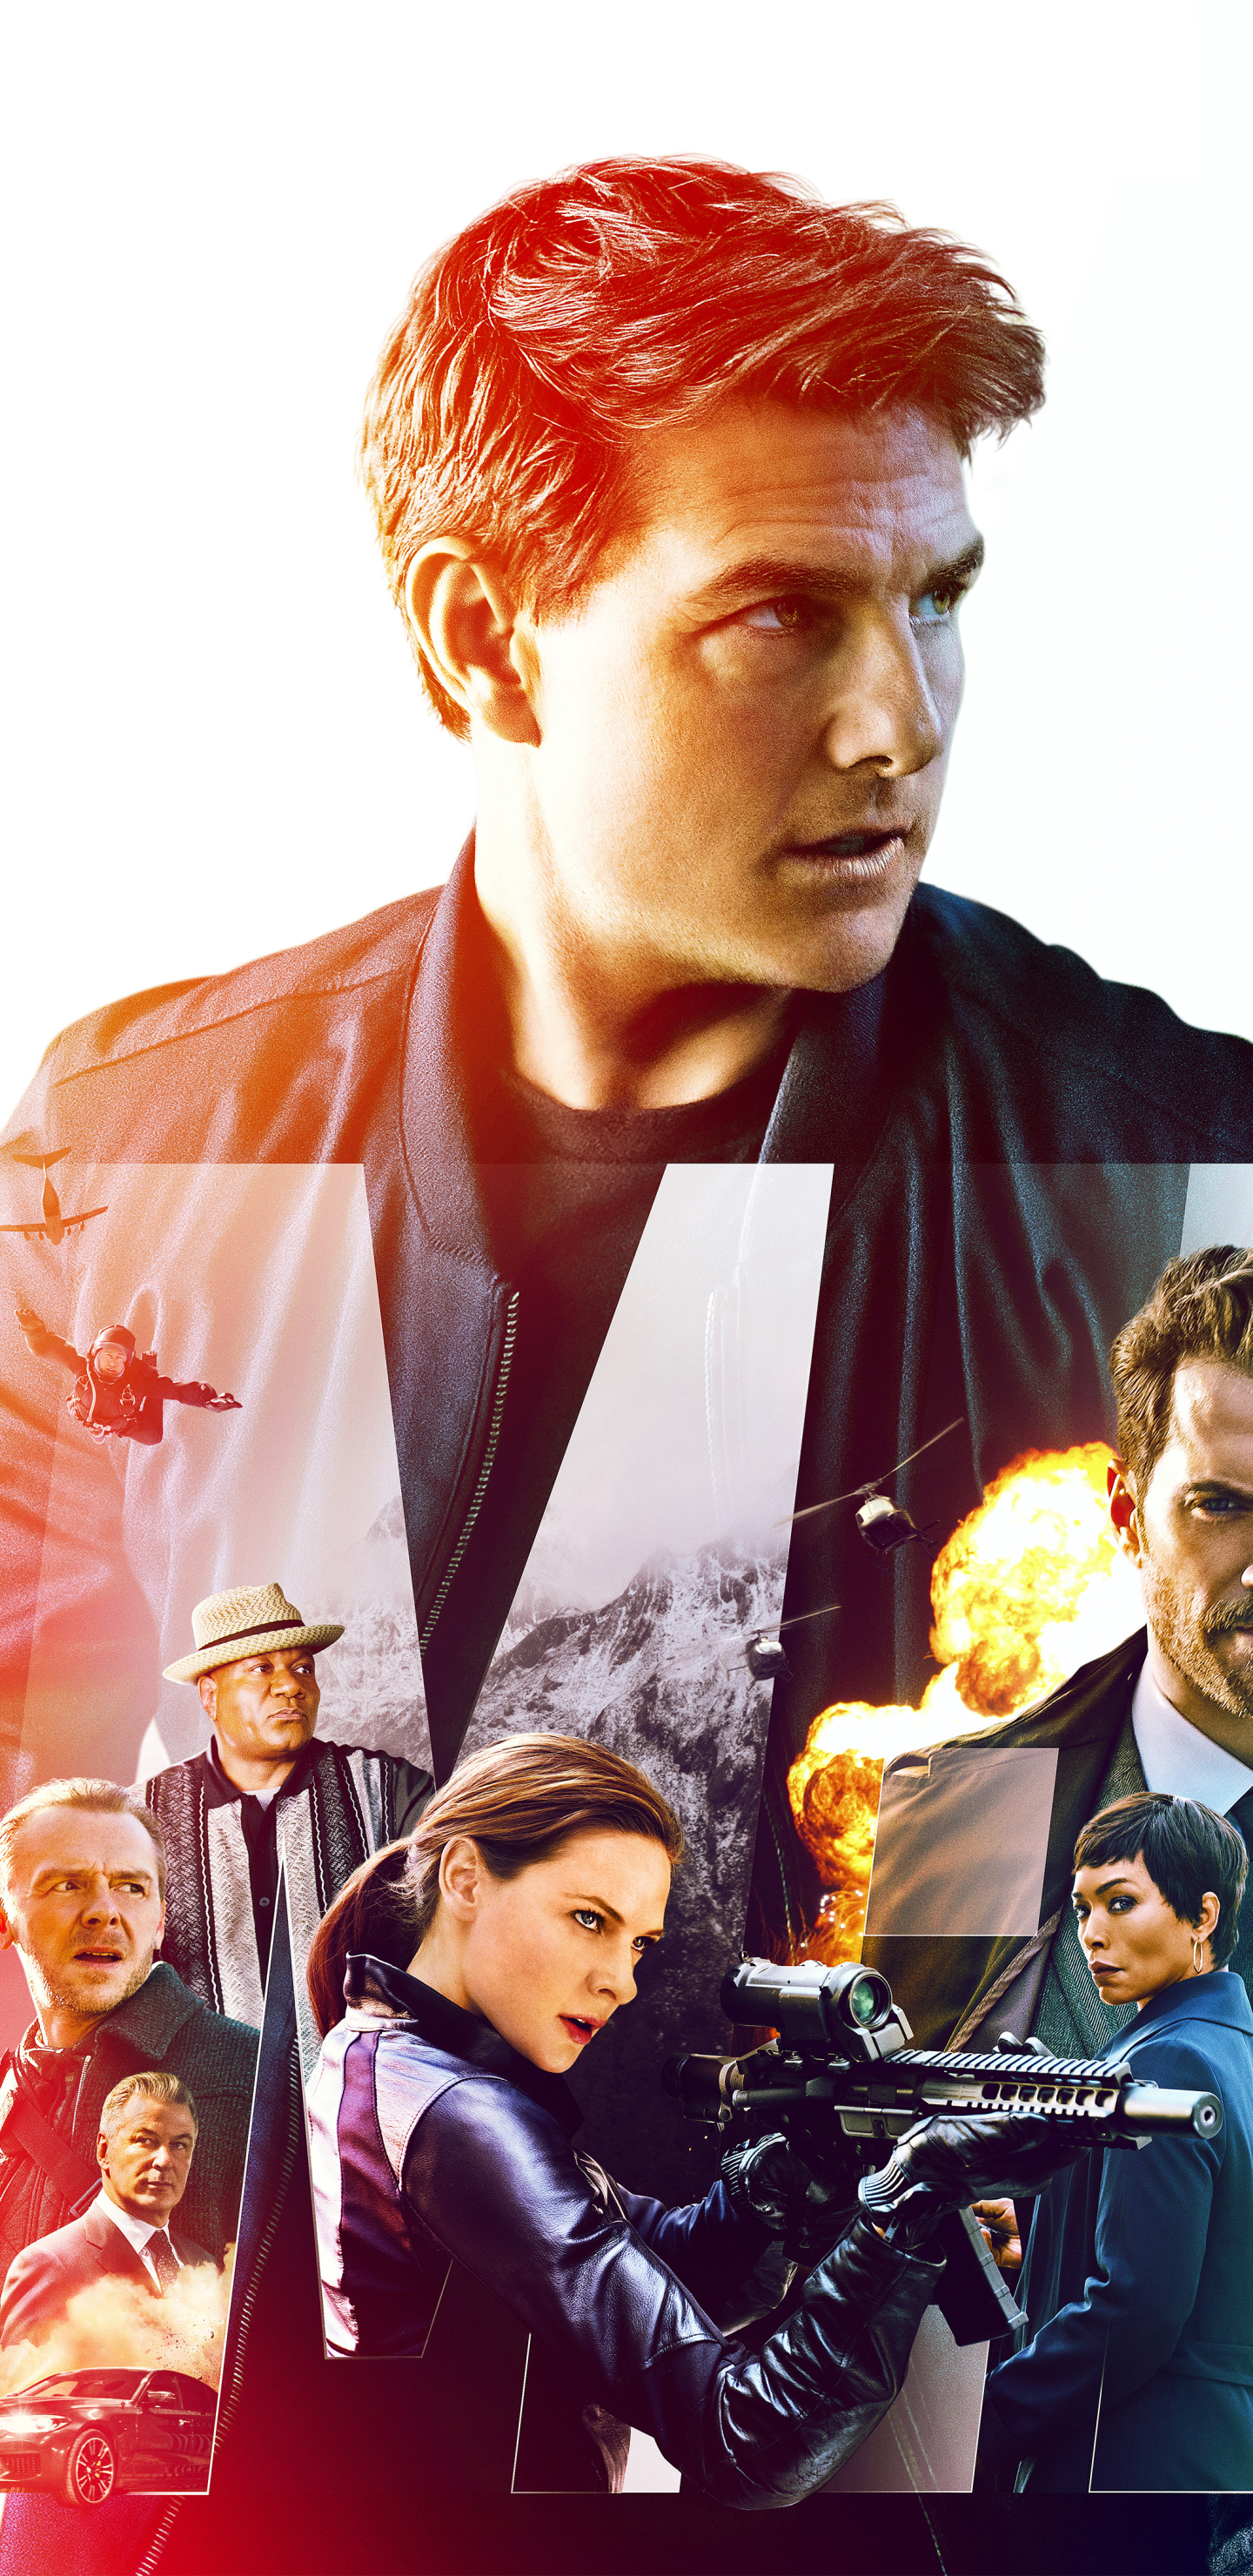 movie, mission: impossible fallout, simon pegg, tom cruise, henry cavill, alec baldwin, rebecca ferguson, ilsa faust, ving rhames, angela bassett, ethan hunt, benji dunn, luther stickell, august walker, alan hunley, mission: impossible